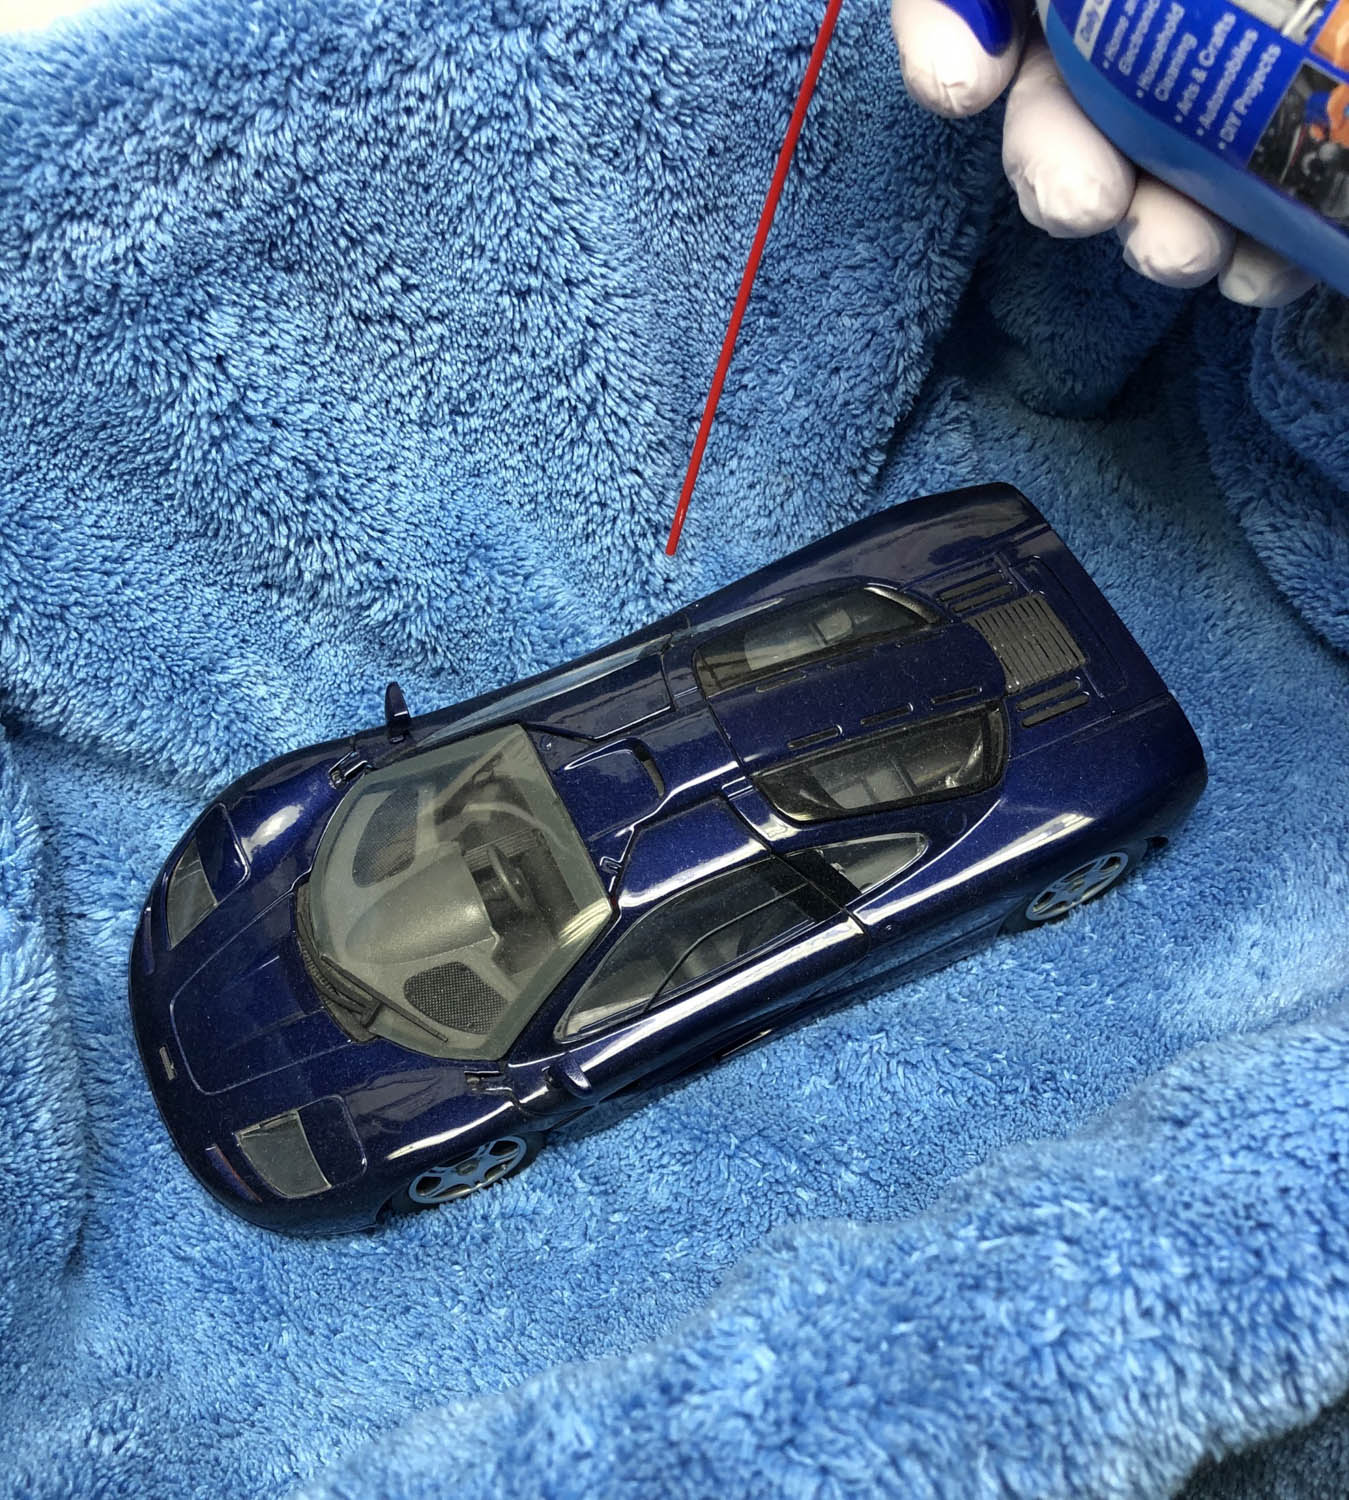 Guide to cleaning and detail equipment for model cars